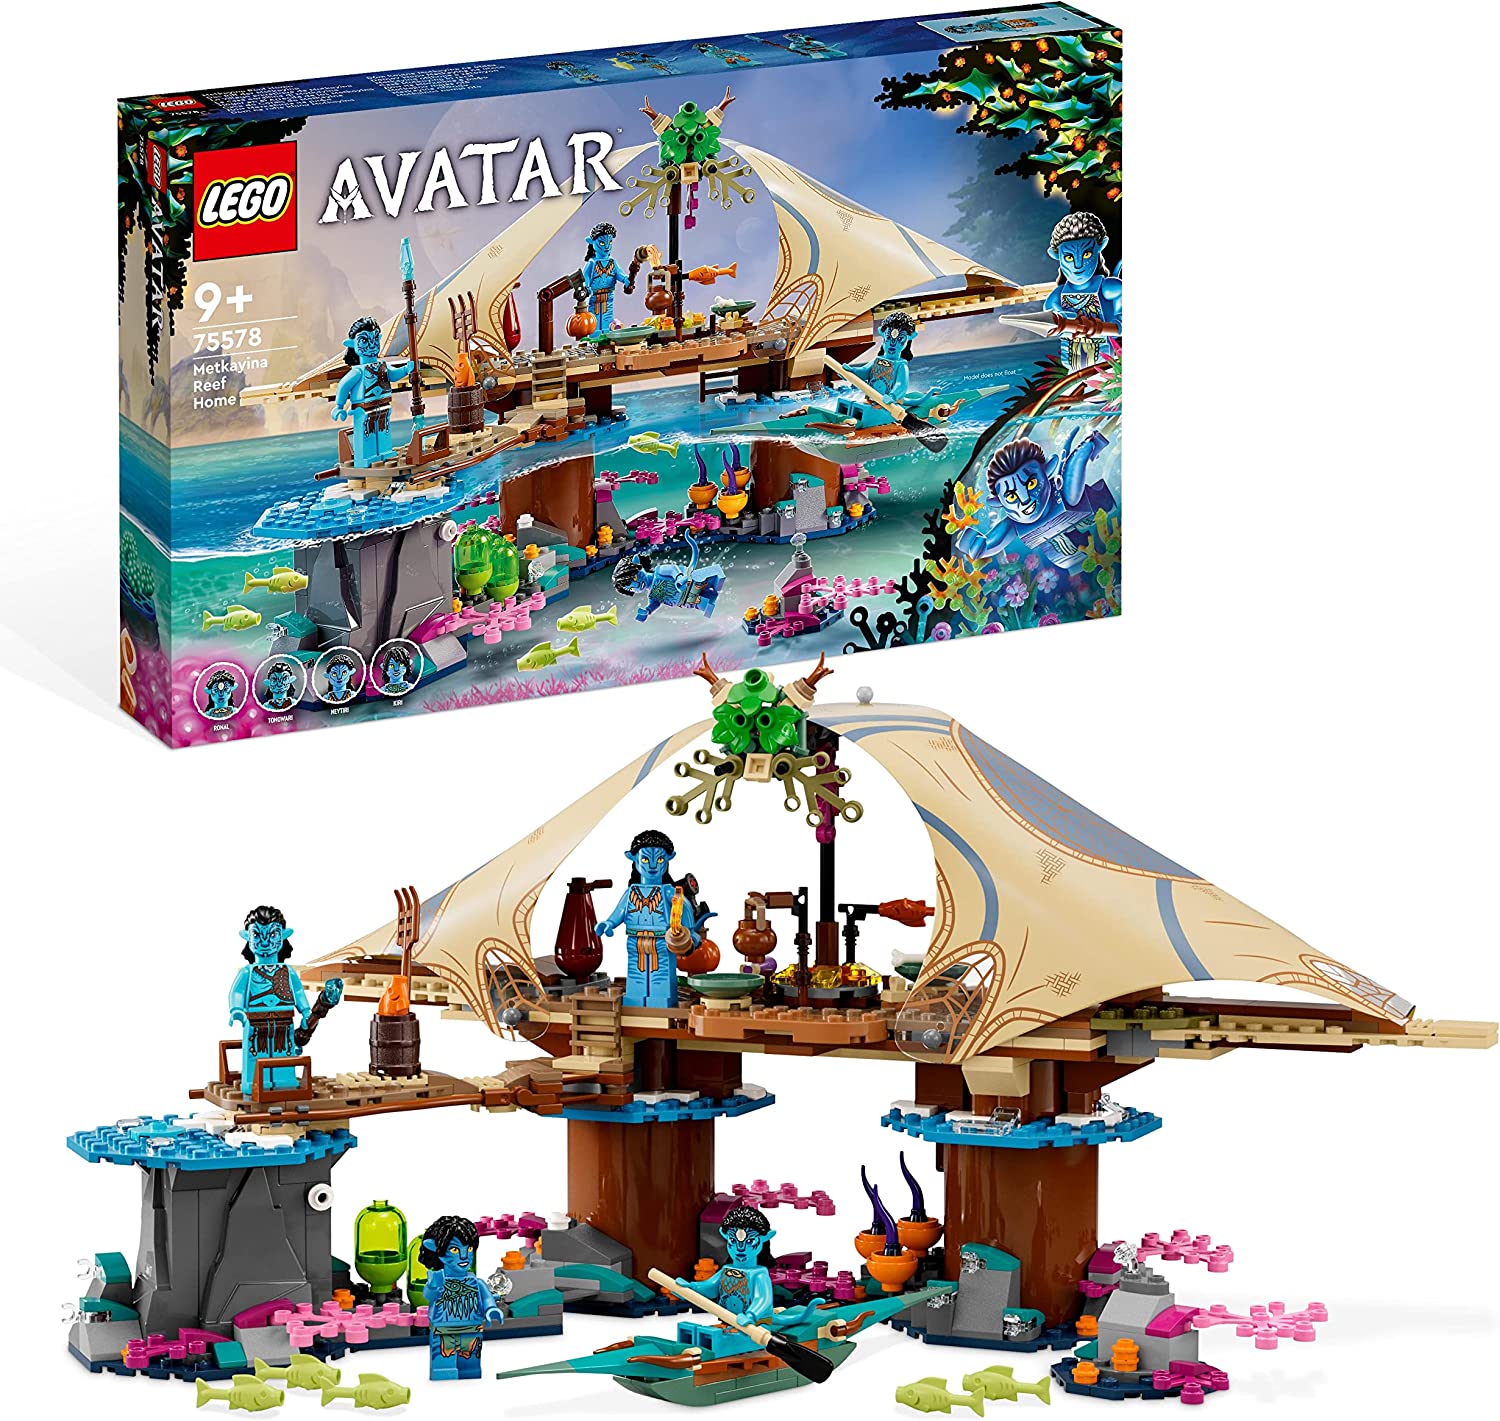 LEGO 75578 Avatar The Reef of Metkayina, Pandora Set of 4 Mini Figures, Collectable for Children and Movie Fans from 9 Years, Avatar: The Way of Water